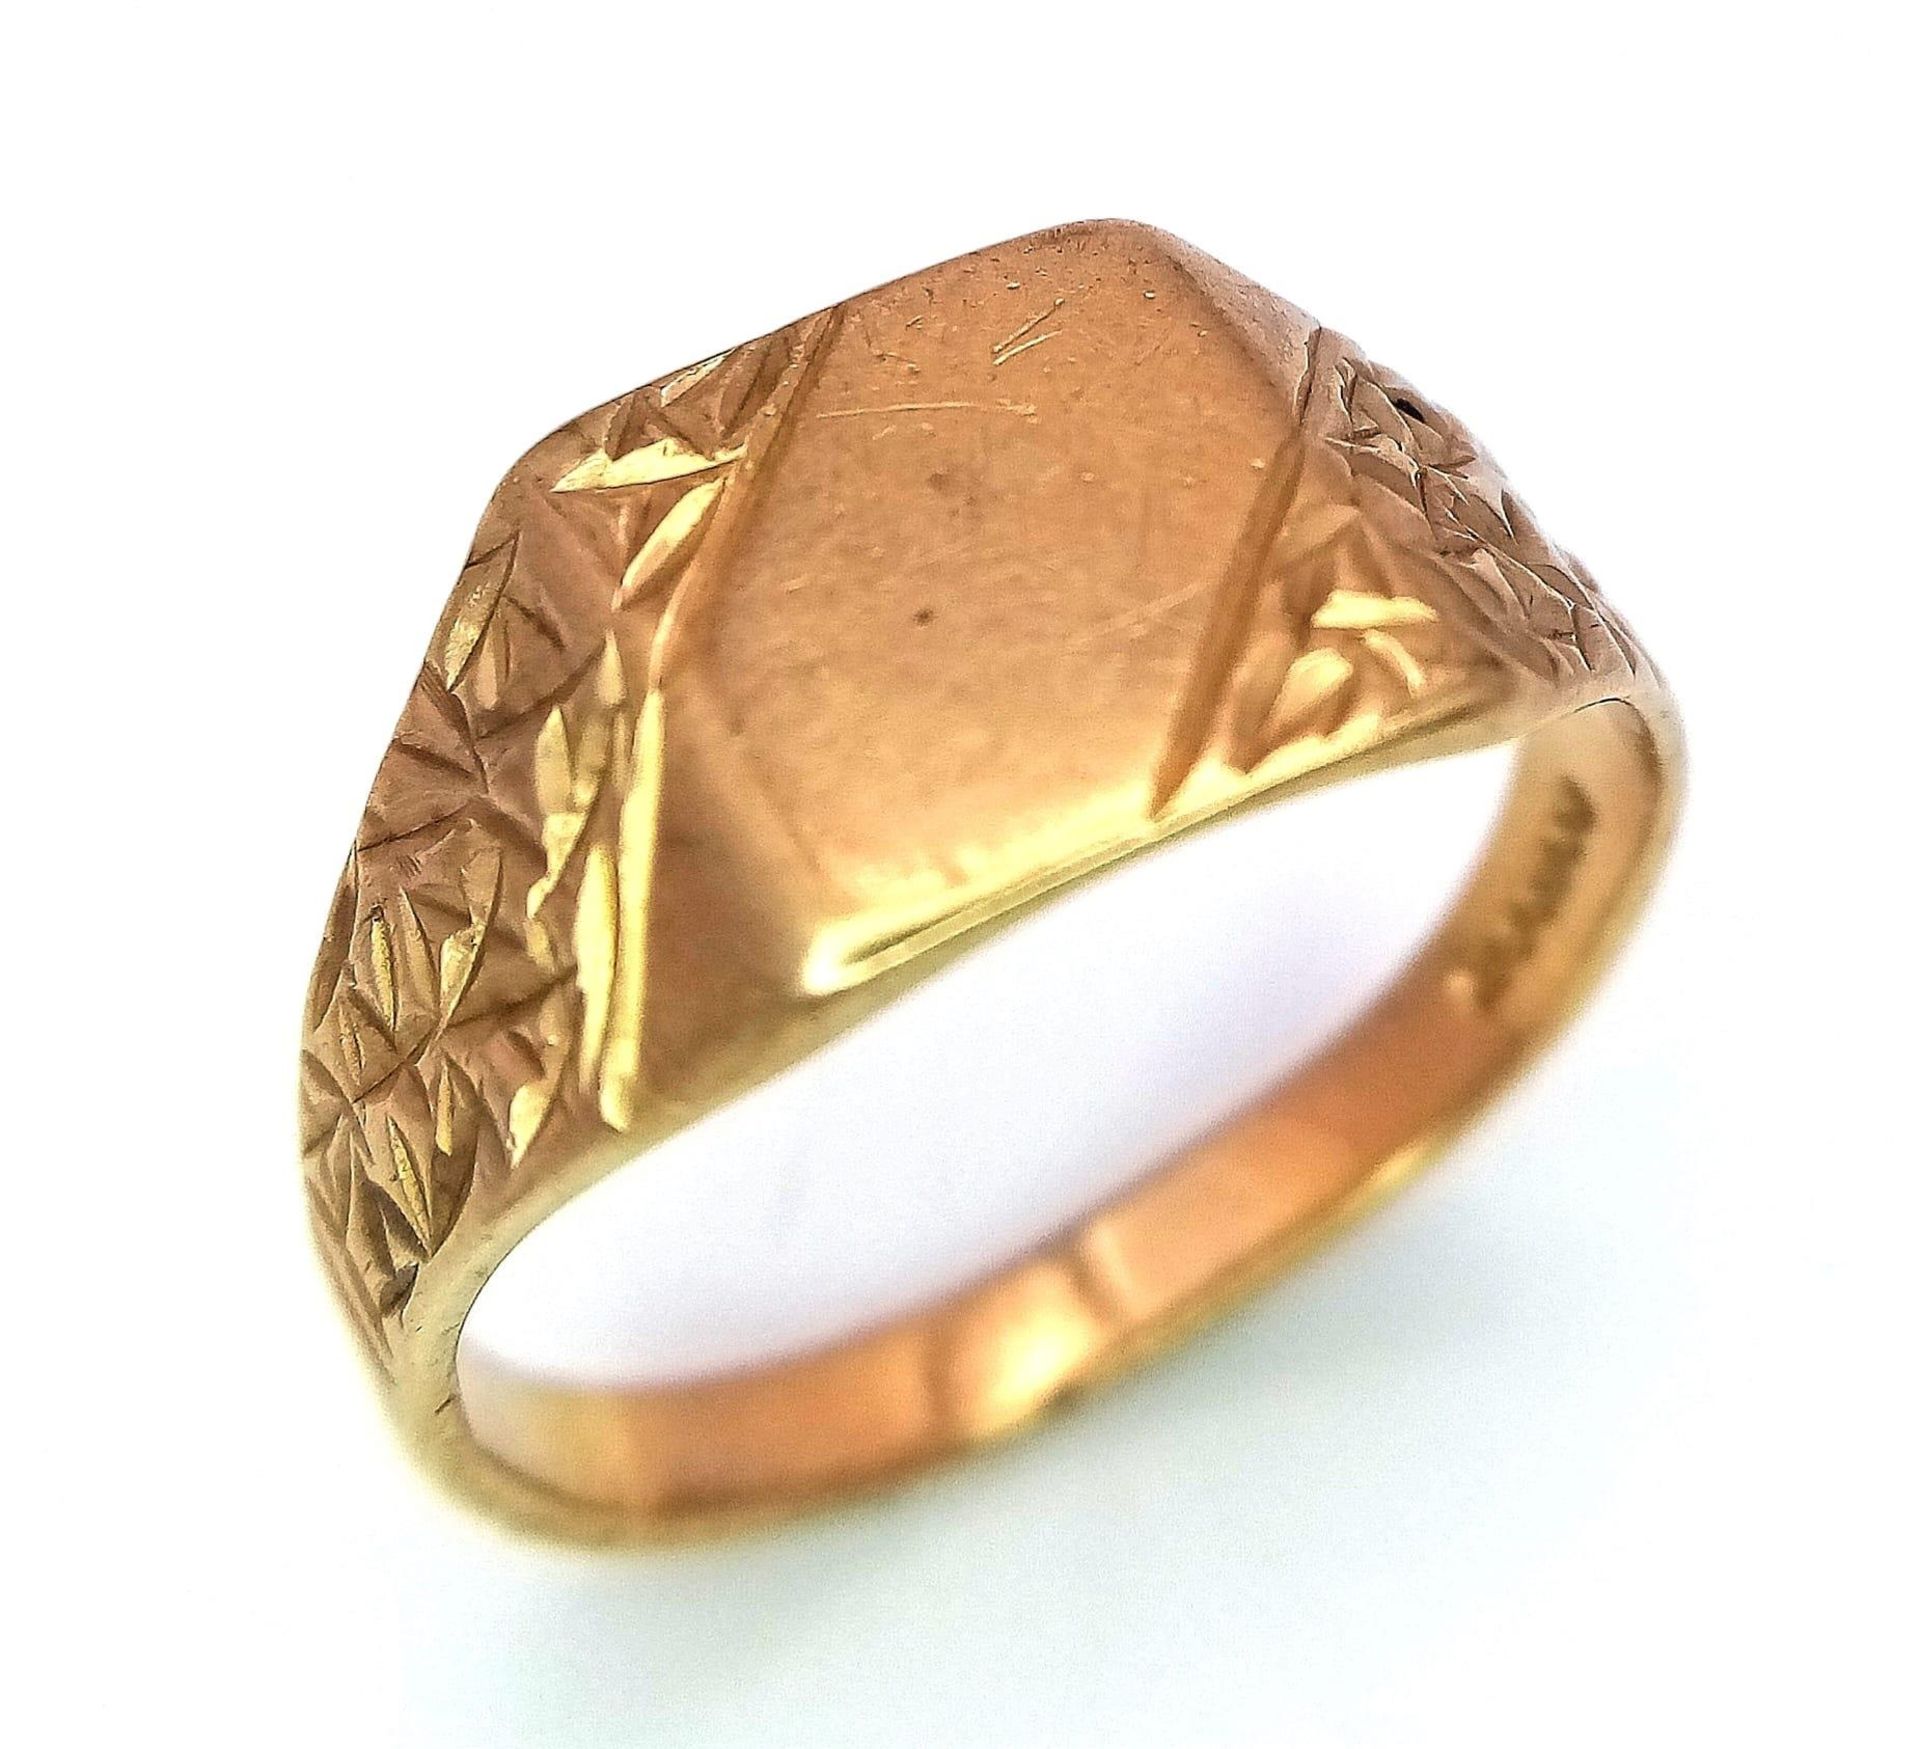 A Vintage 9K Yellow Gold Signet Ring. Size Q 1/2. Full UK hallmarks. 3.42g weight. - Image 3 of 5